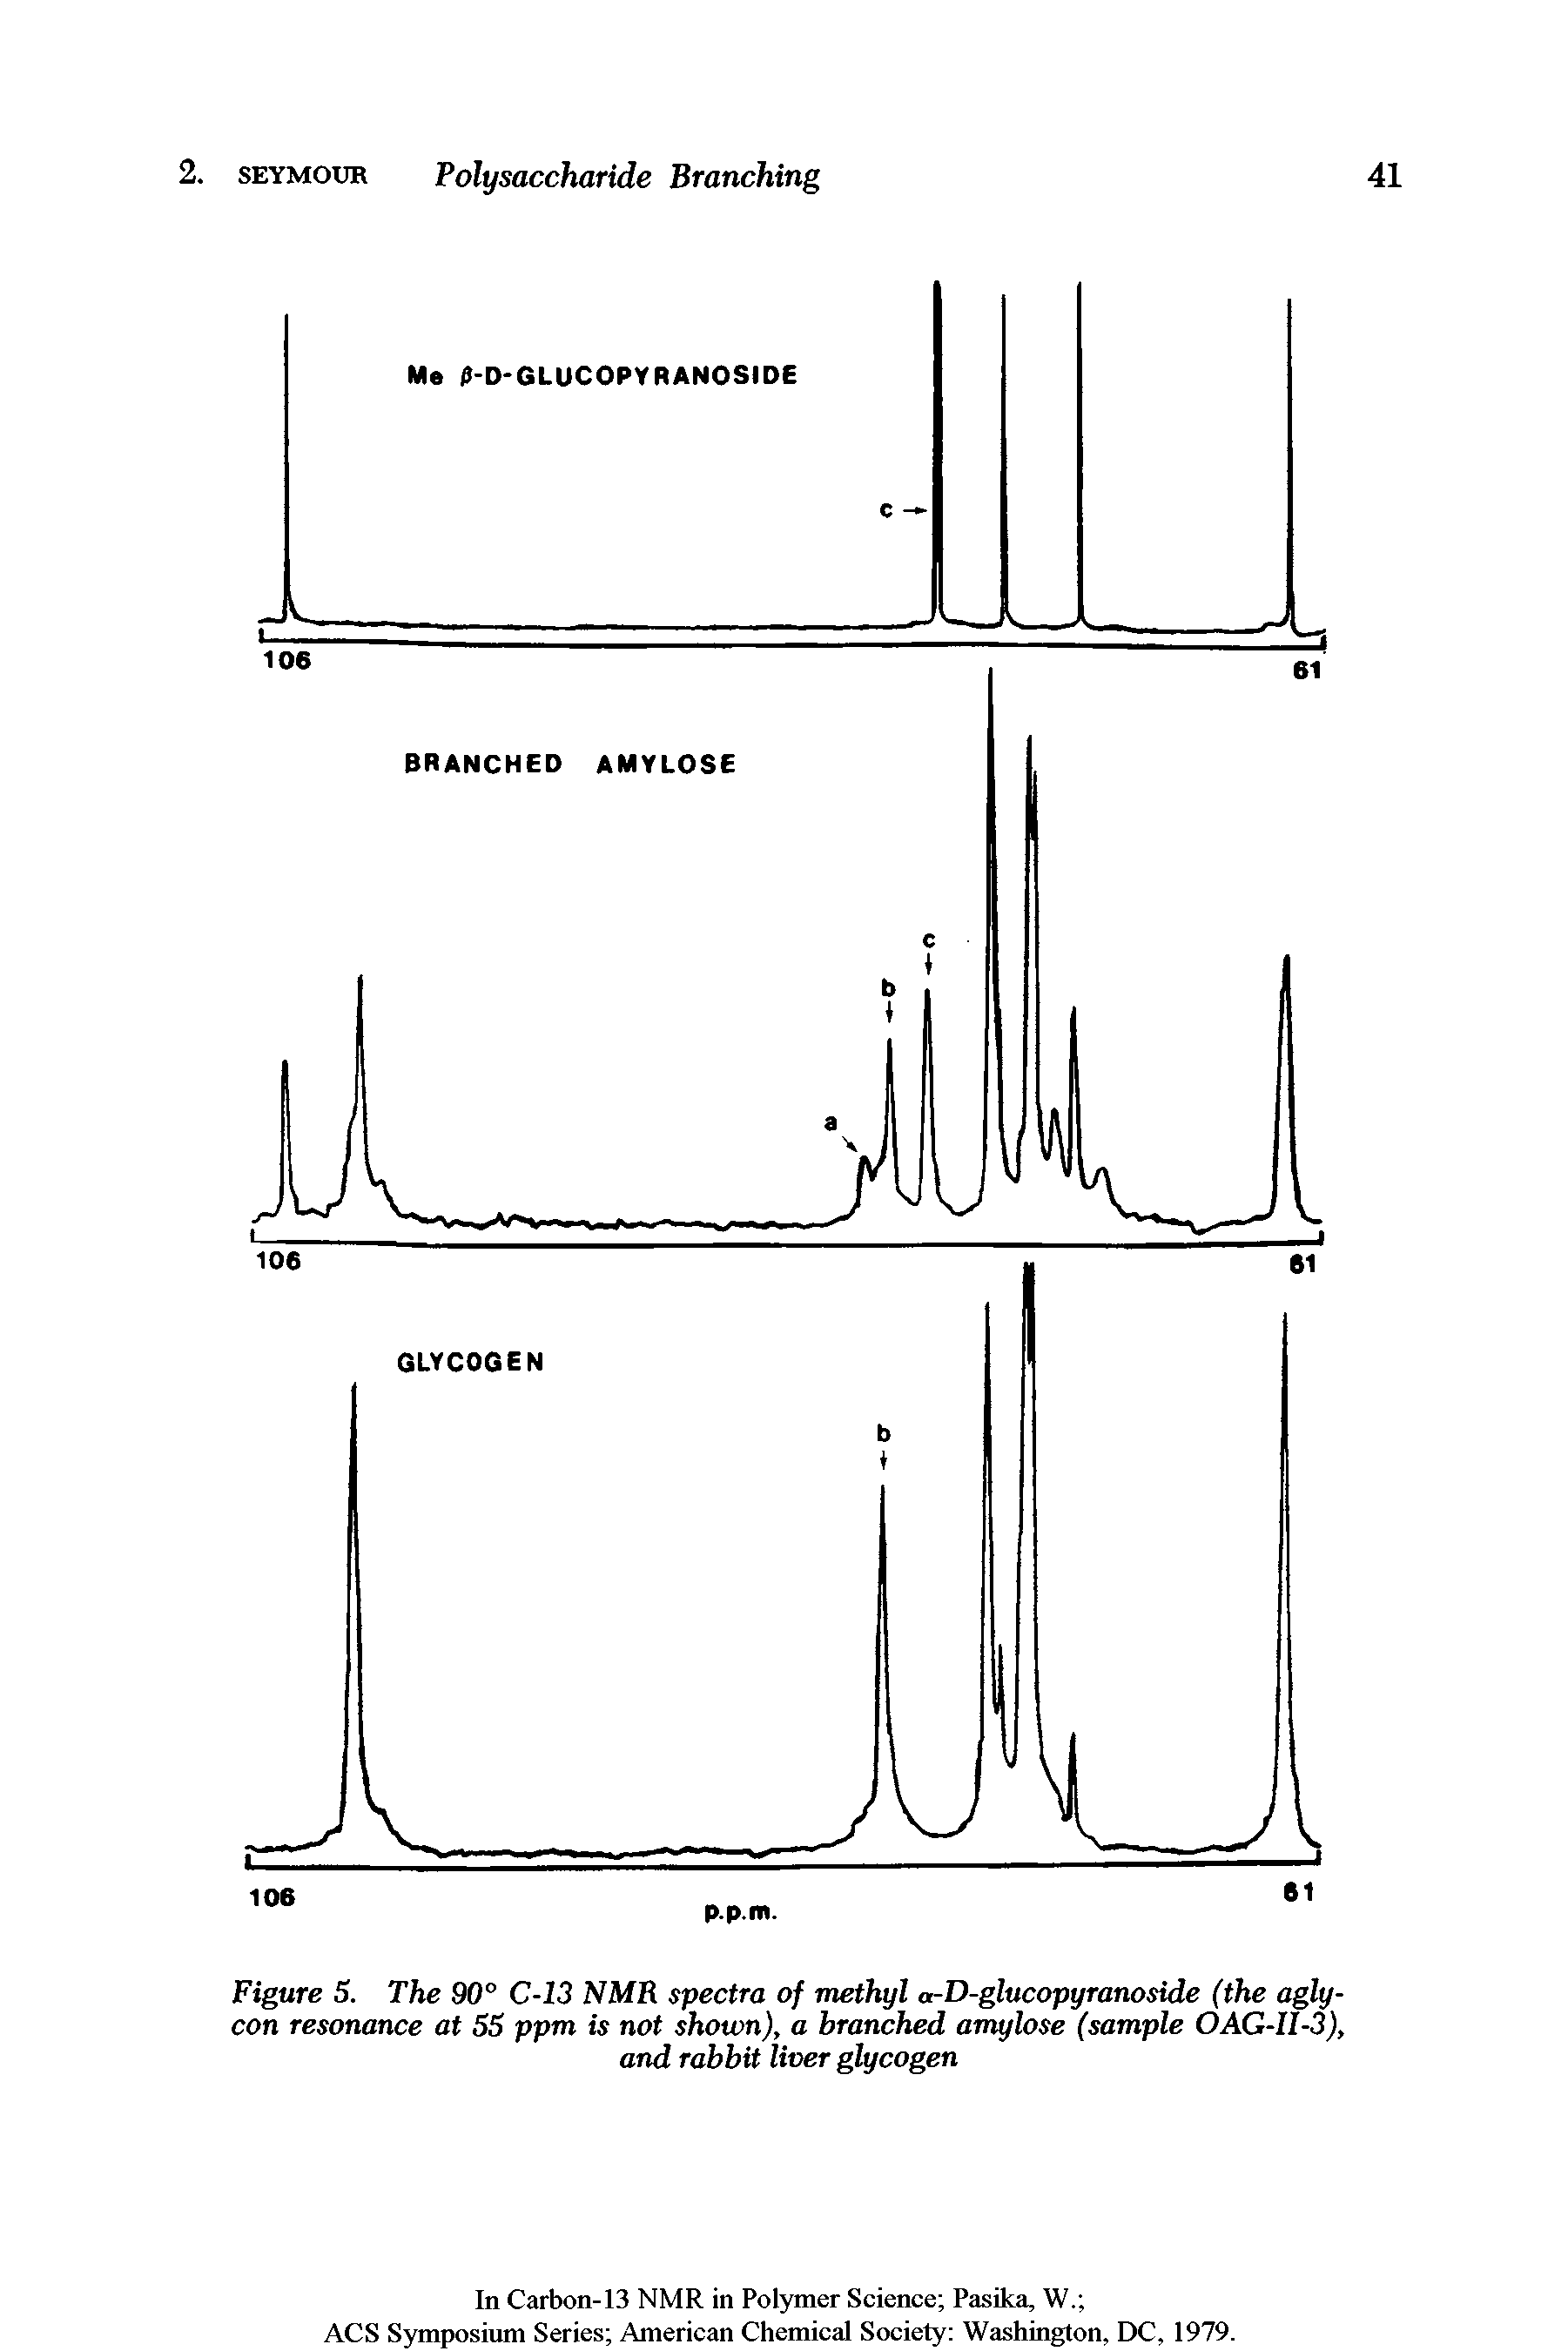 Figure 5. The 90° C-13 NMR spectra of methyl a-D-glucopyranoside (the agly-con resonance at S3 ppm is not shown), a branched amylose (sample OAG-II-3), and rabbit liver glycogen...